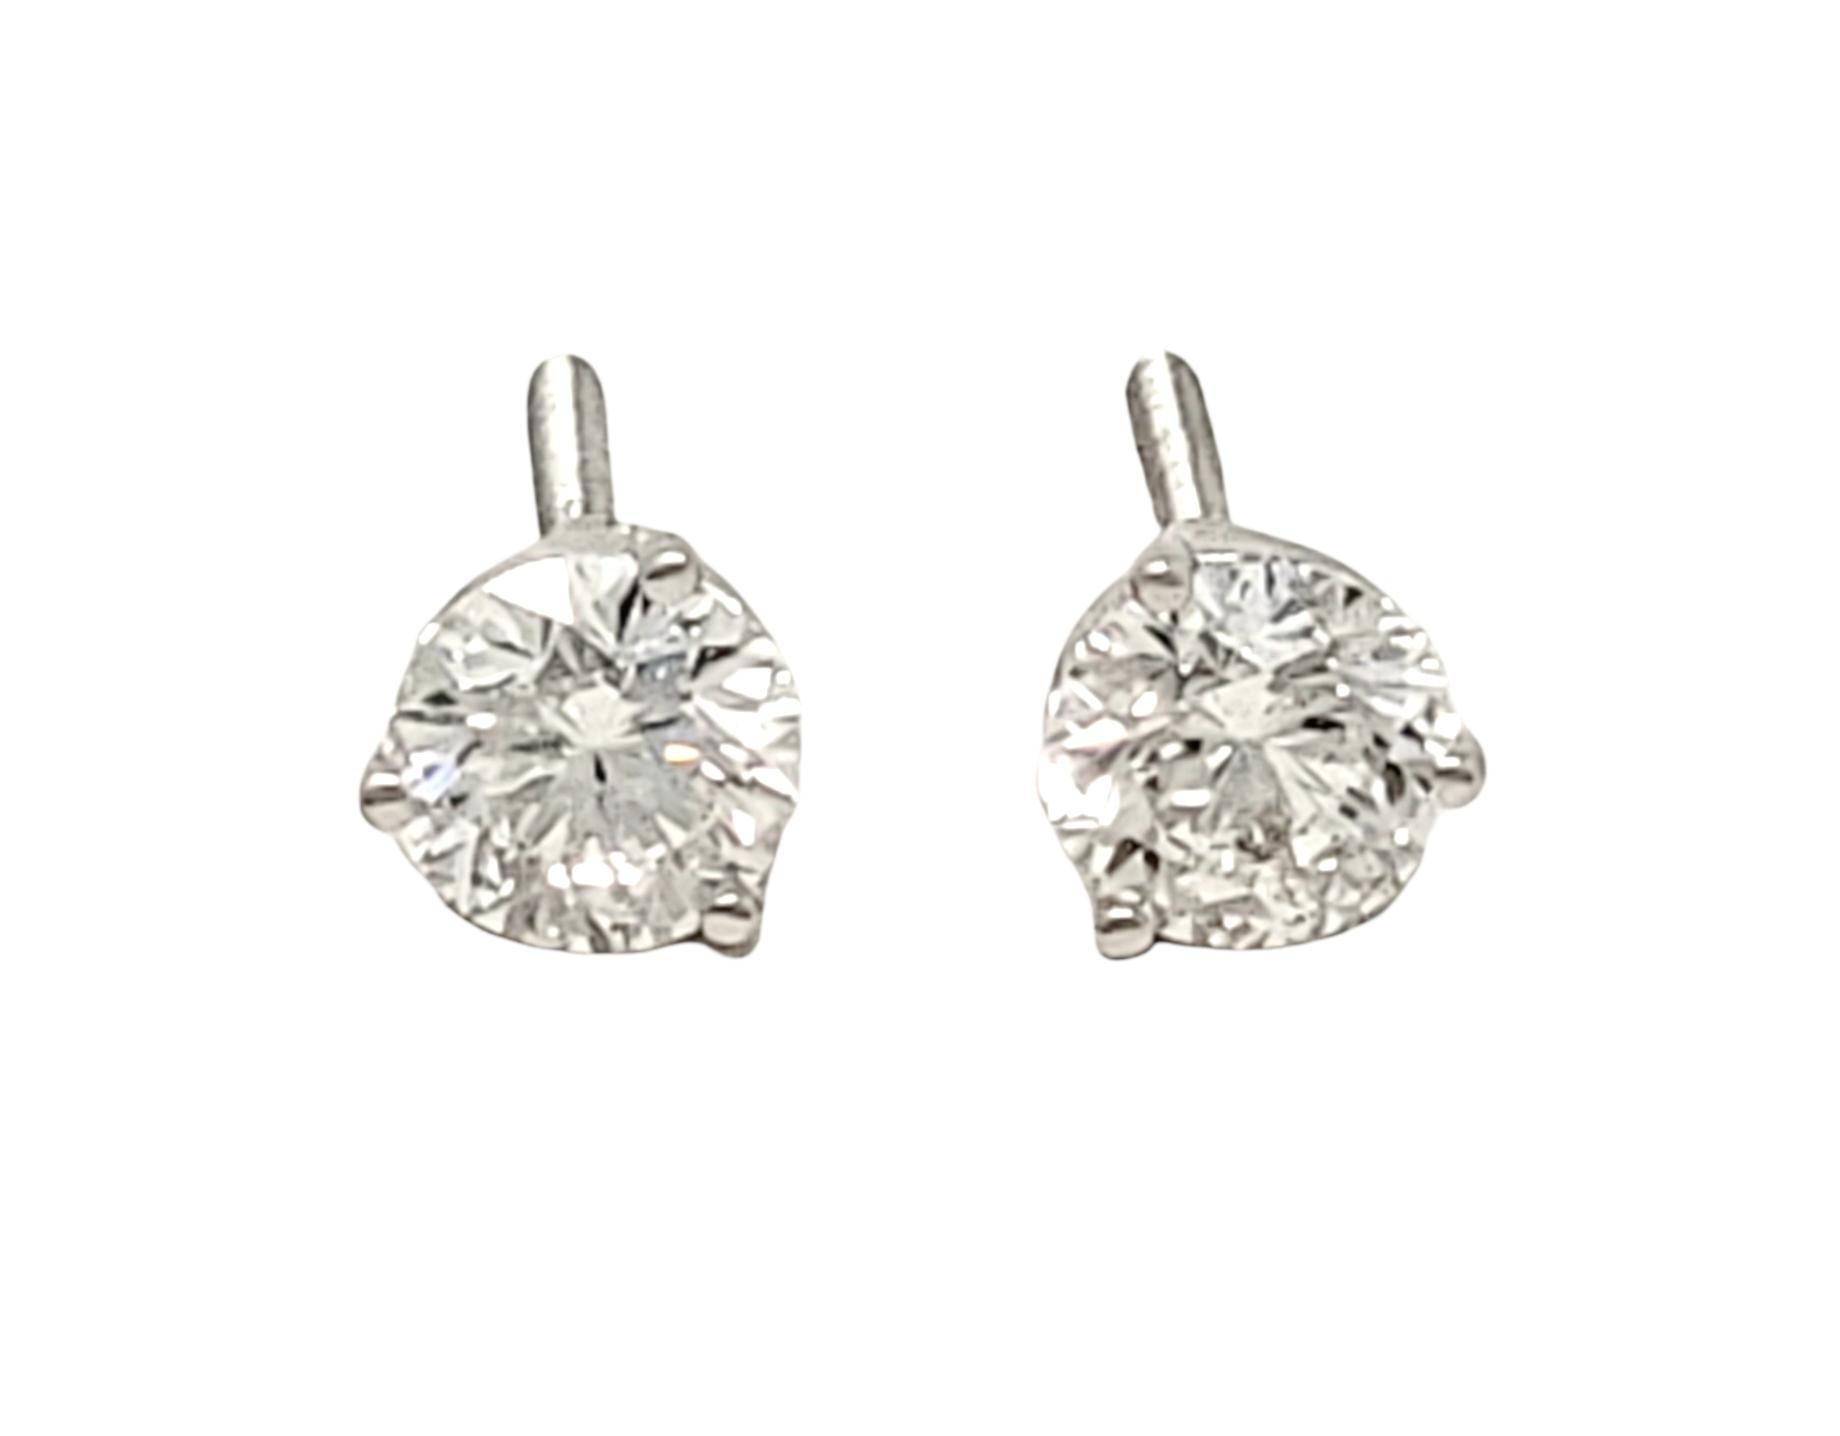 .94 Carats Total Round Leo Diamond Stud Earrings in White Gold 3 Prong Setting For Sale 4